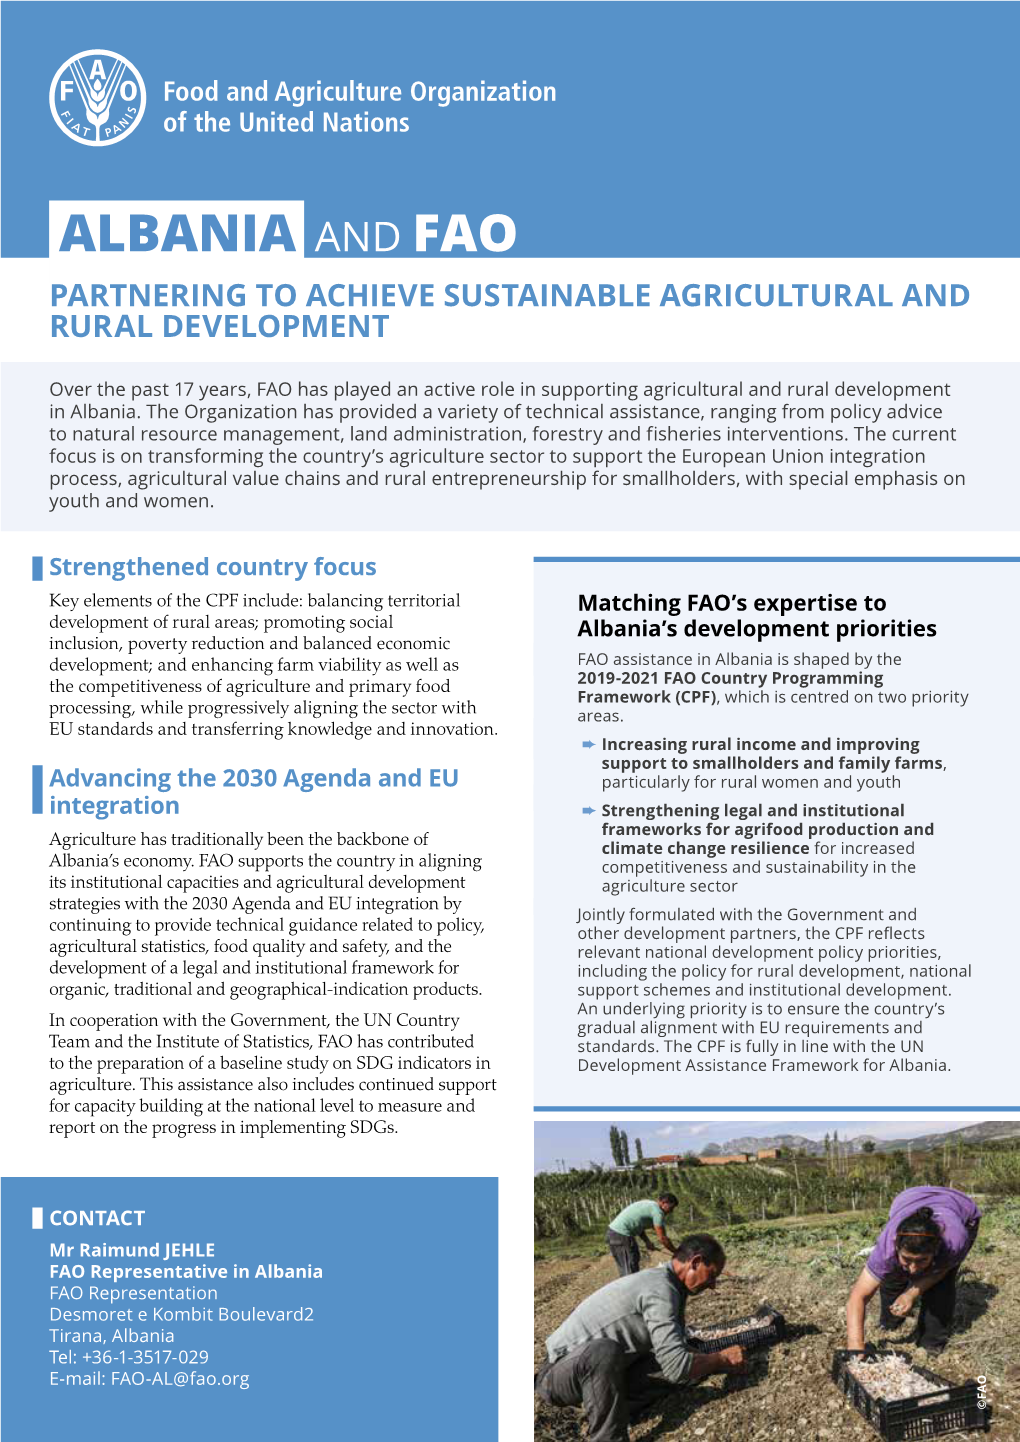 Albania and Fao Partnering to Achieve Sustainable Agricultural and Rural Development